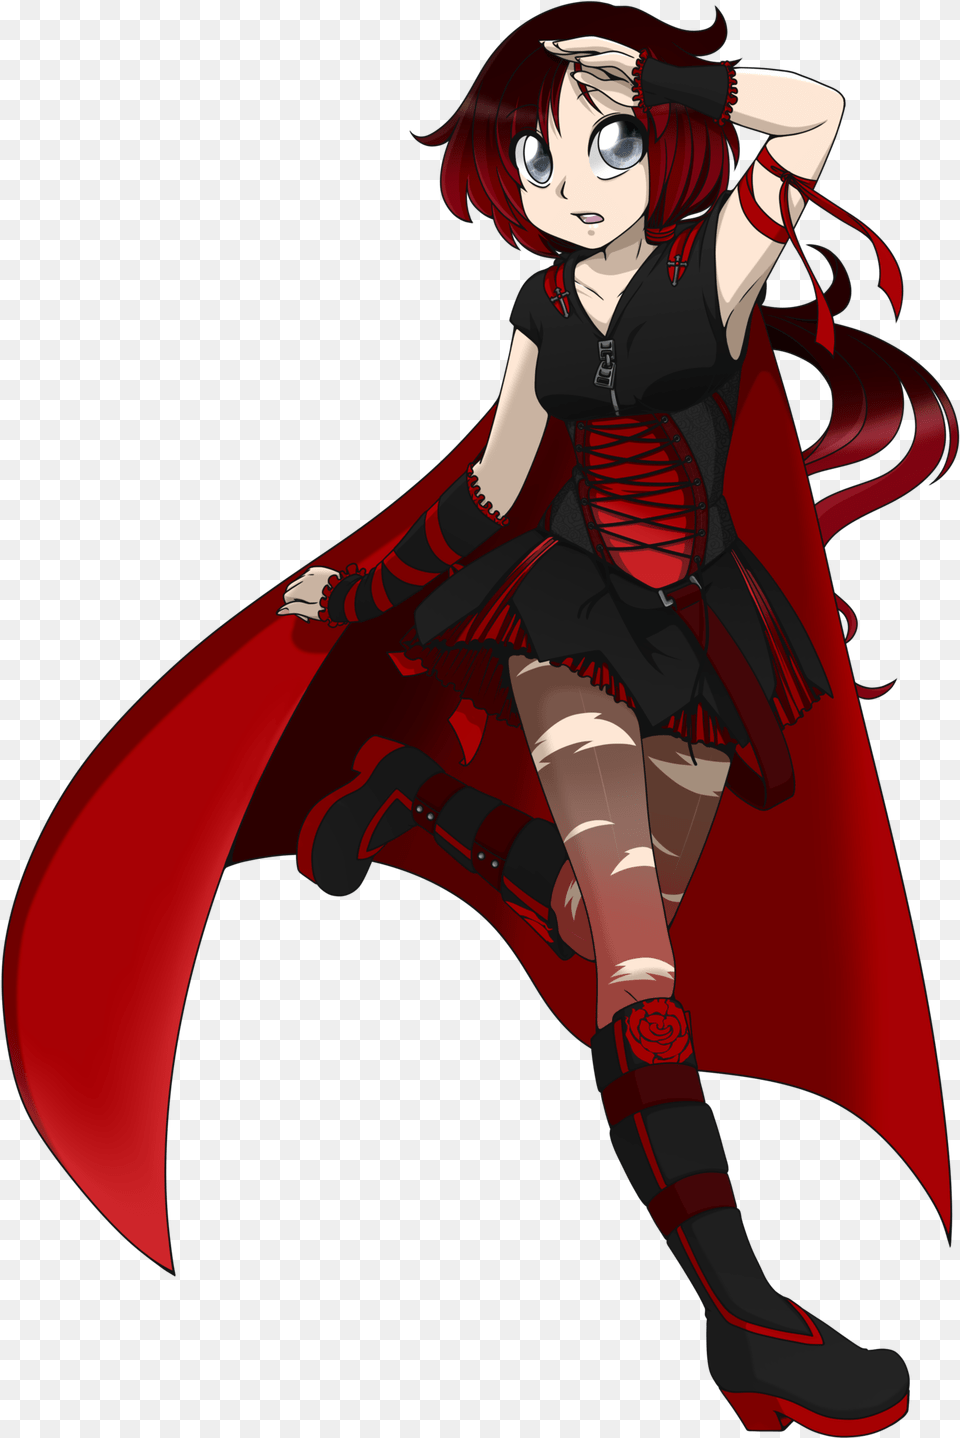 Transparent Ruby Rose Ruby Rose Minecraft Pixel Art, Book, Cape, Clothing, Comics Png Image